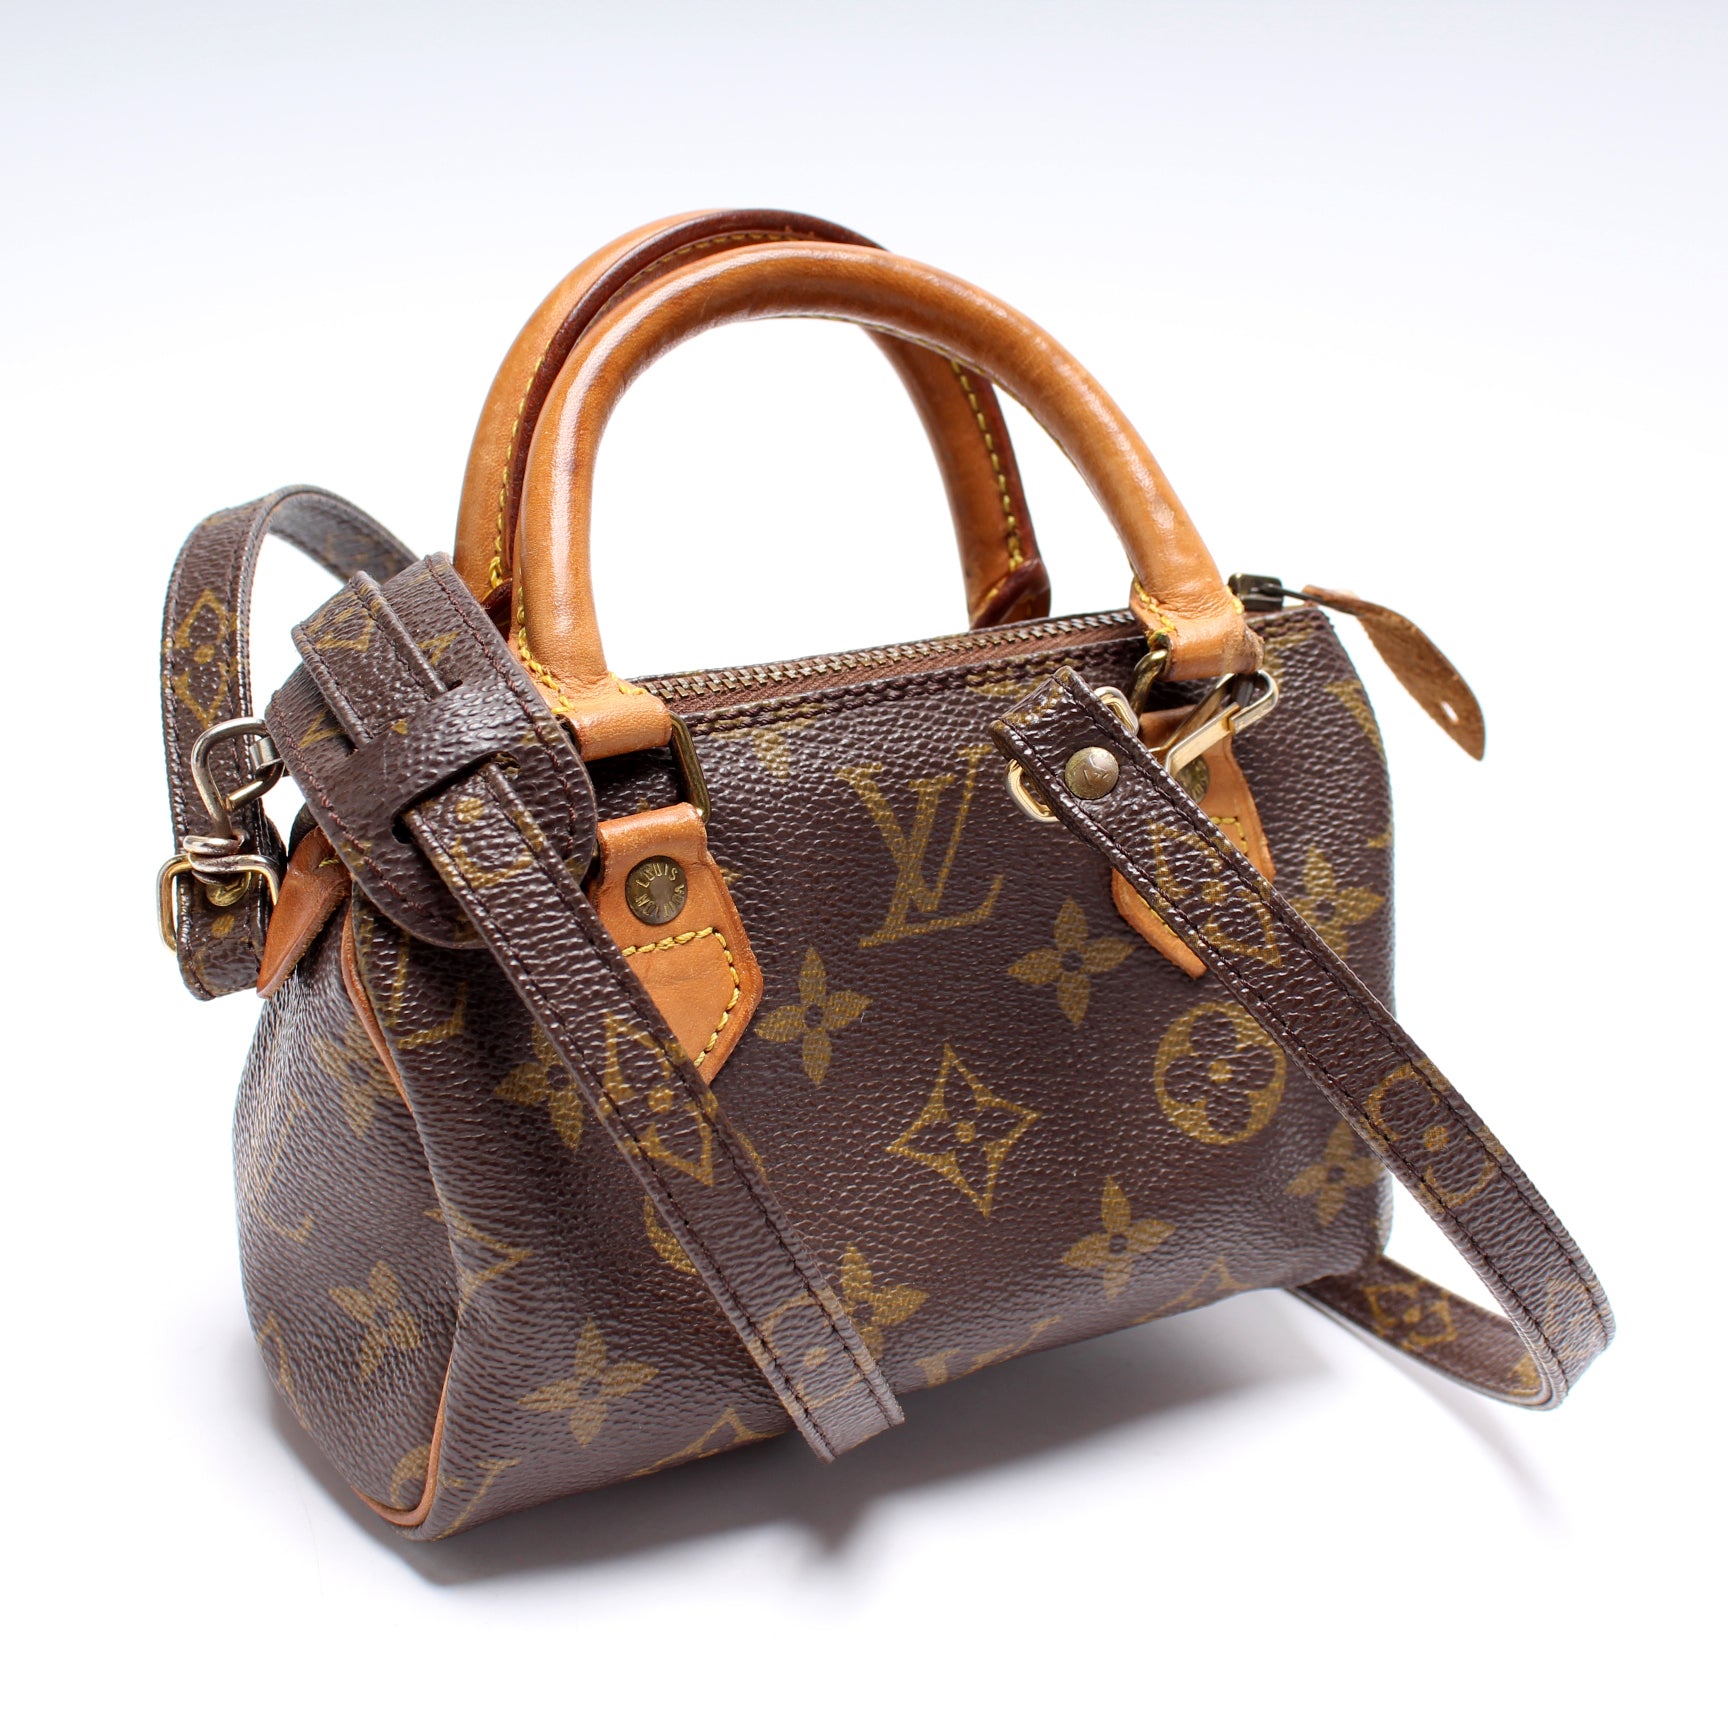 Louis Vuitton - Authenticated Nano Speedy / Mini HL Handbag - Leather Brown For Woman, Very Good condition